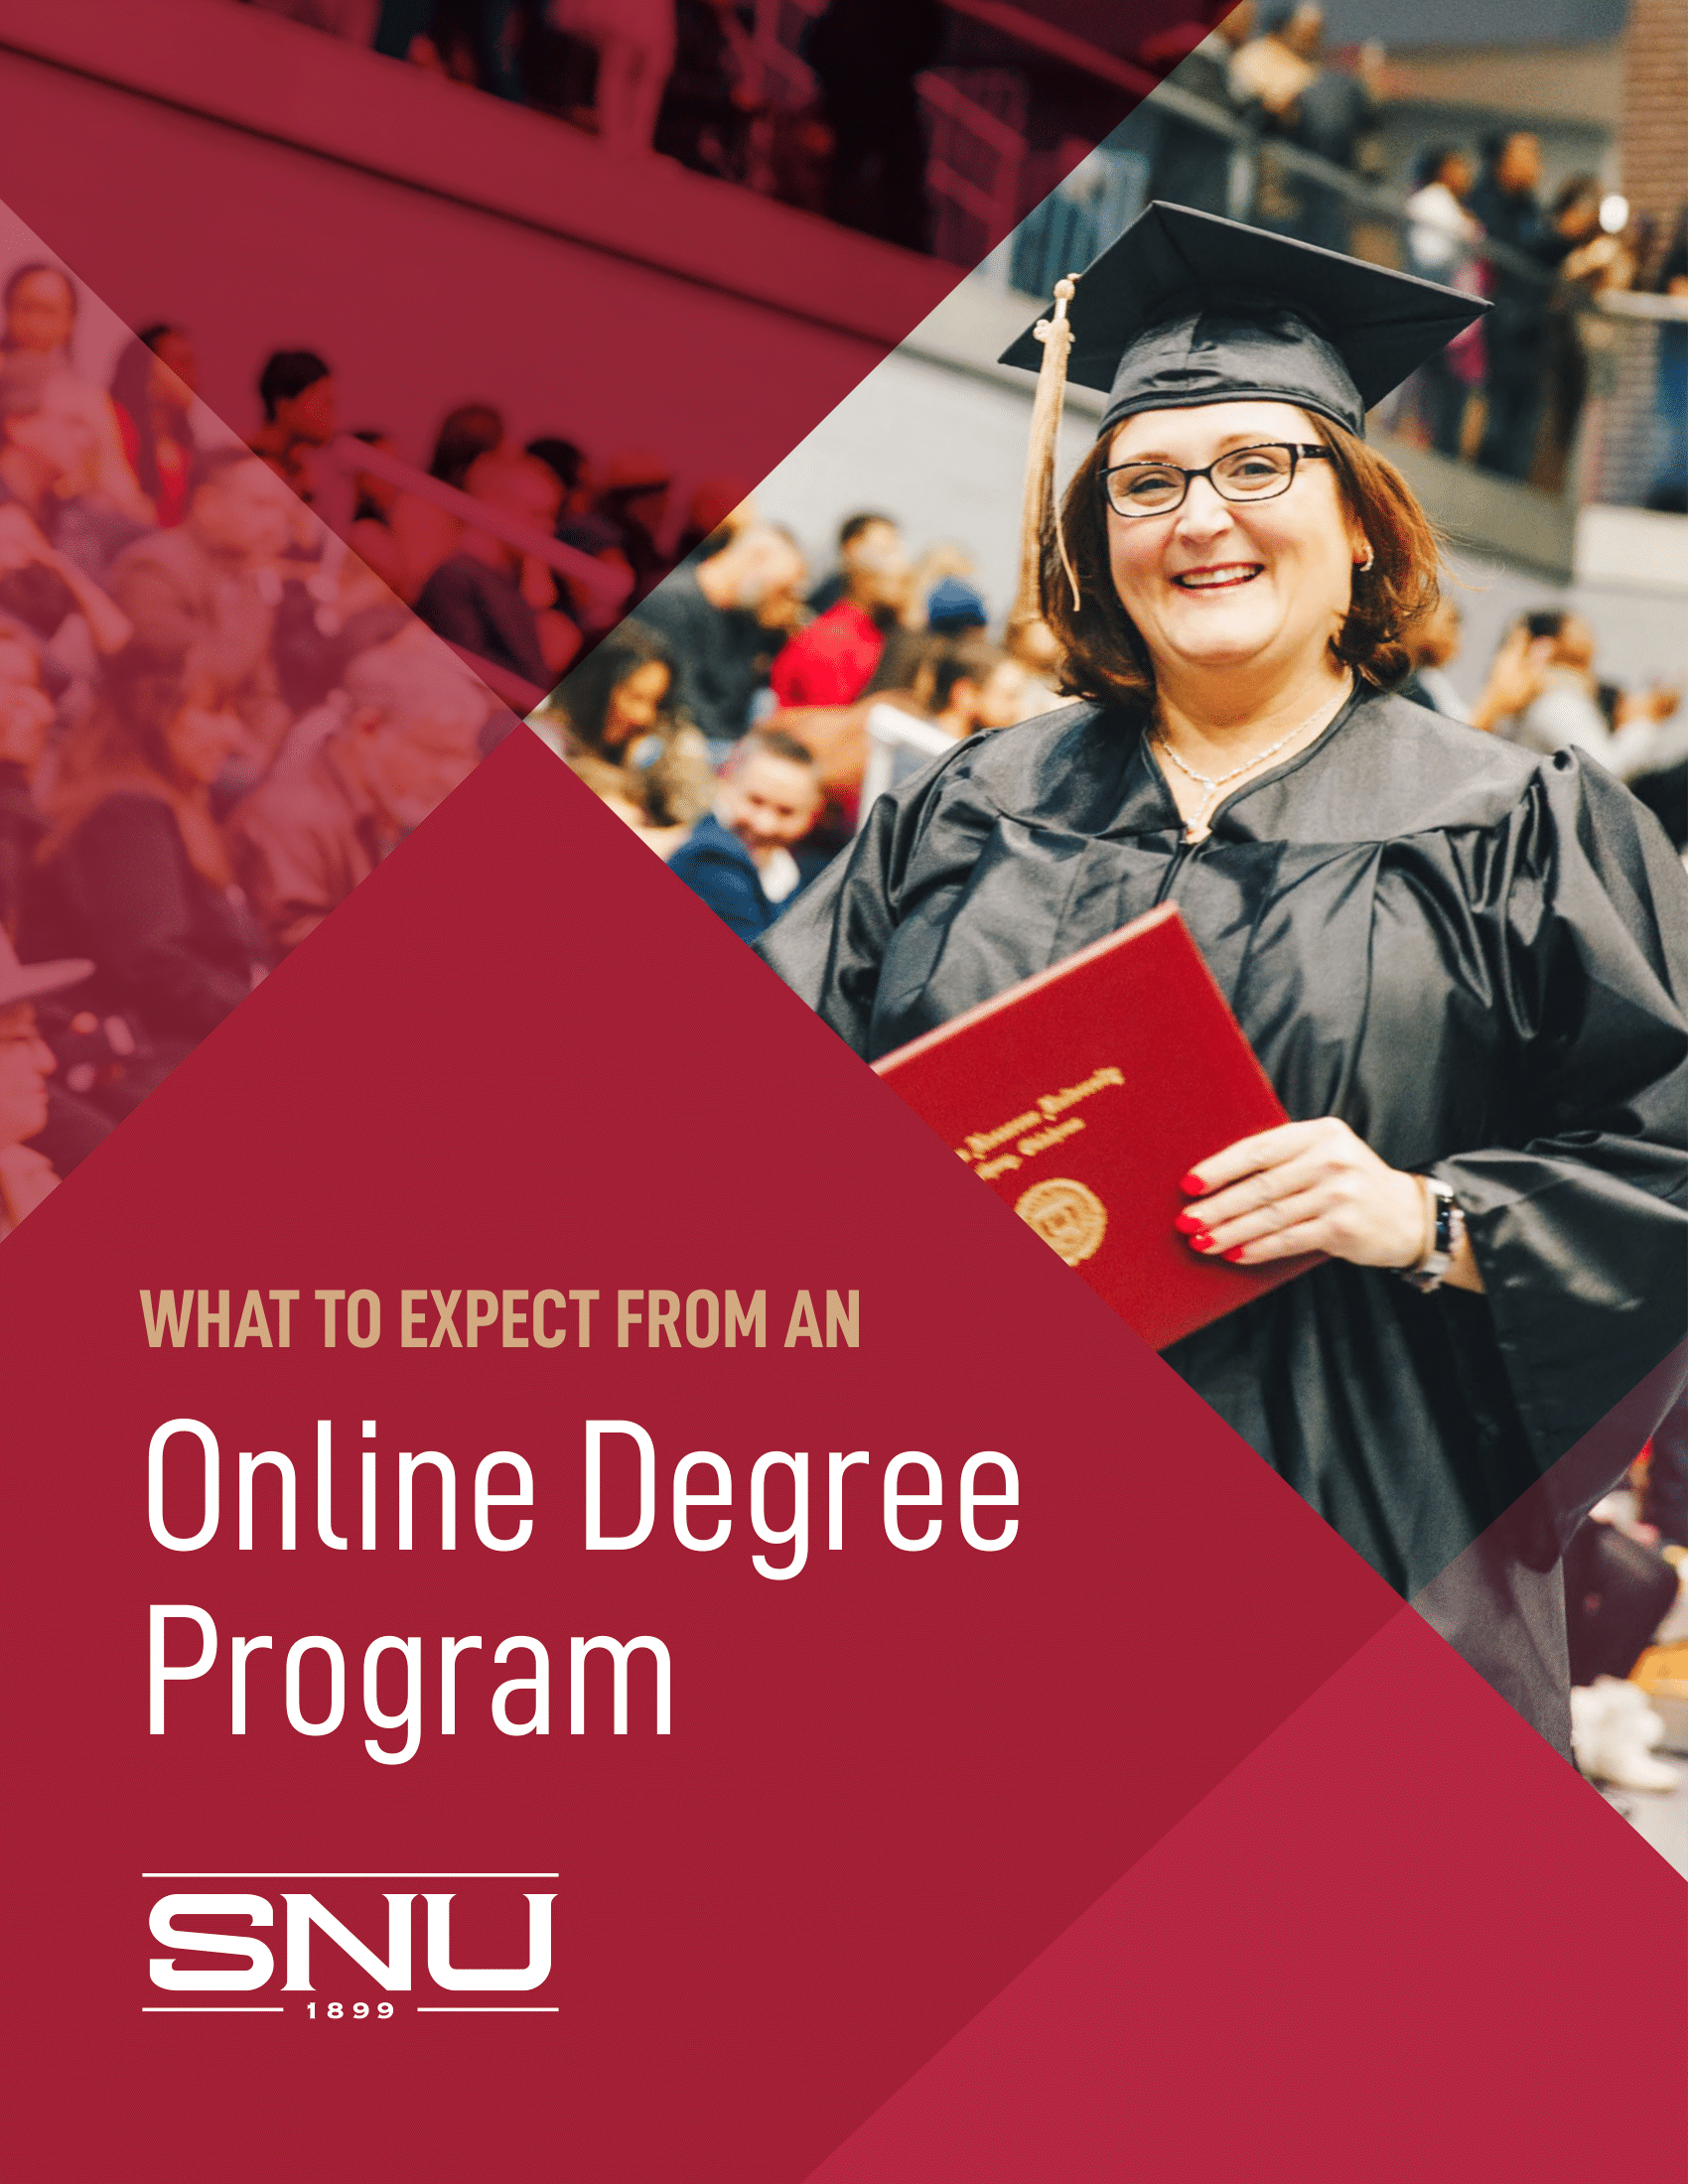 Programs and Degrees